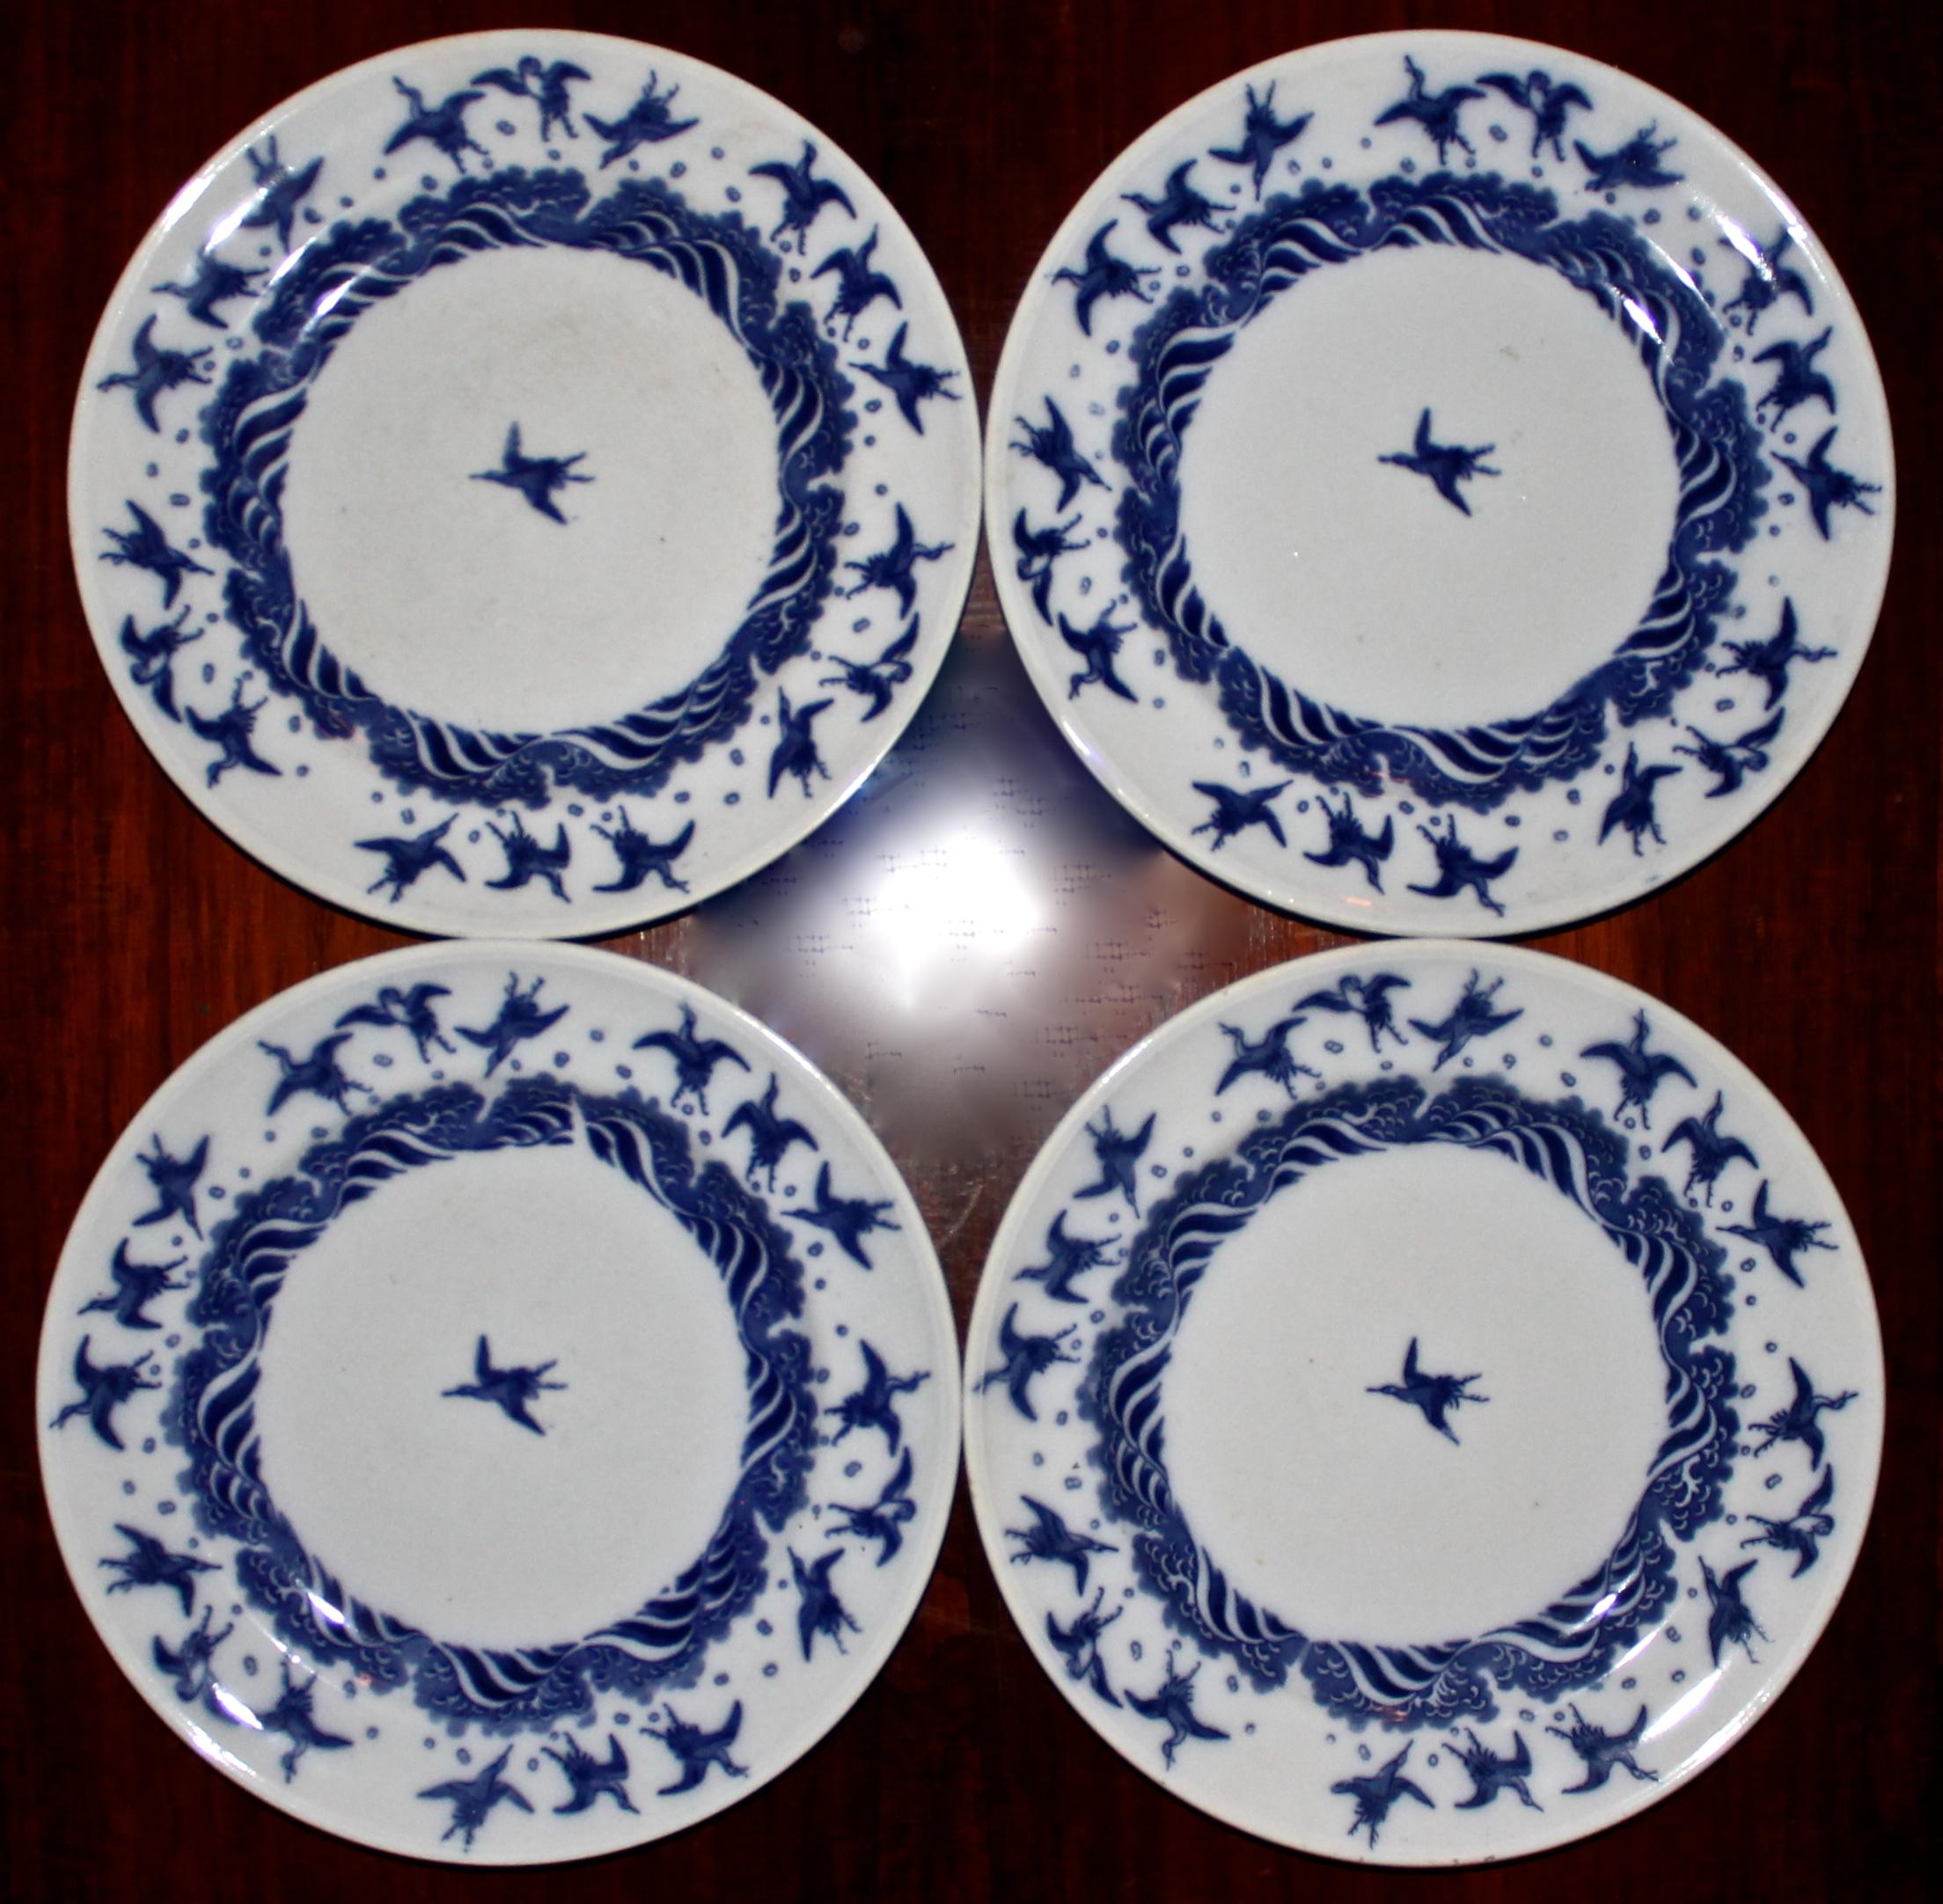 4 beautiful Minton's Aesthetic Movement plates with Japanese designs by Christopher Dresser.